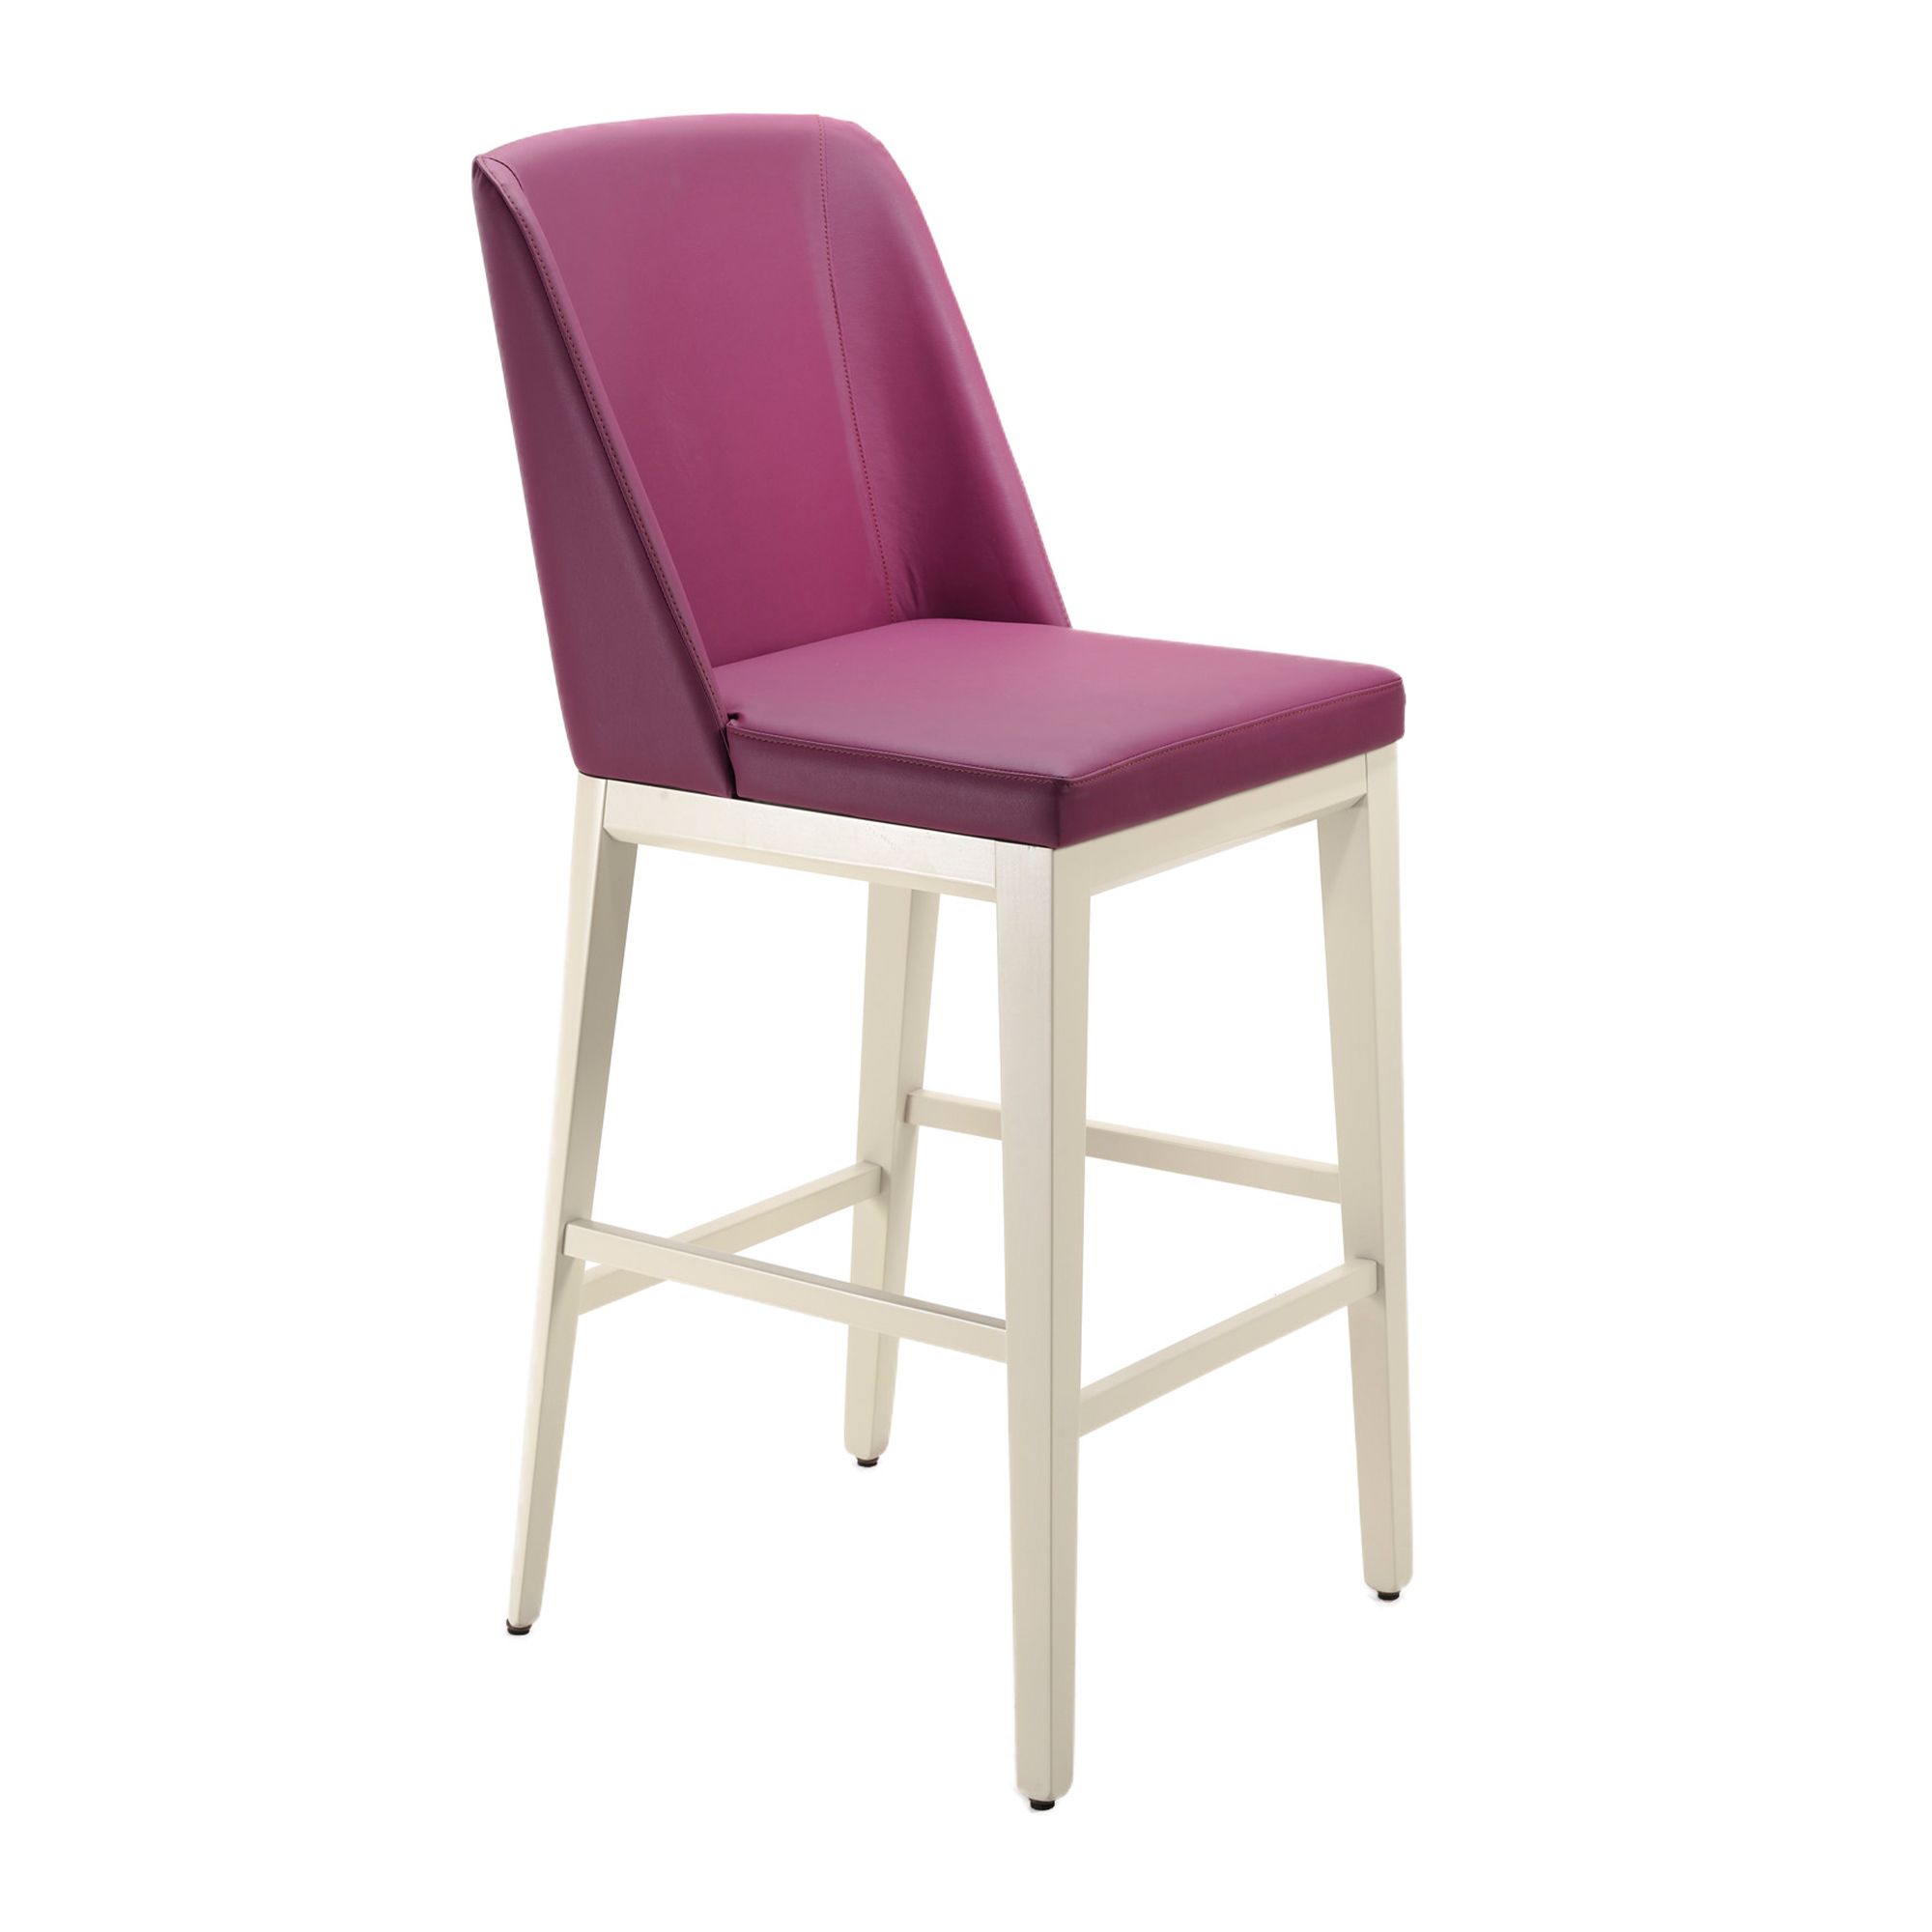 Model 852 stool in matching style